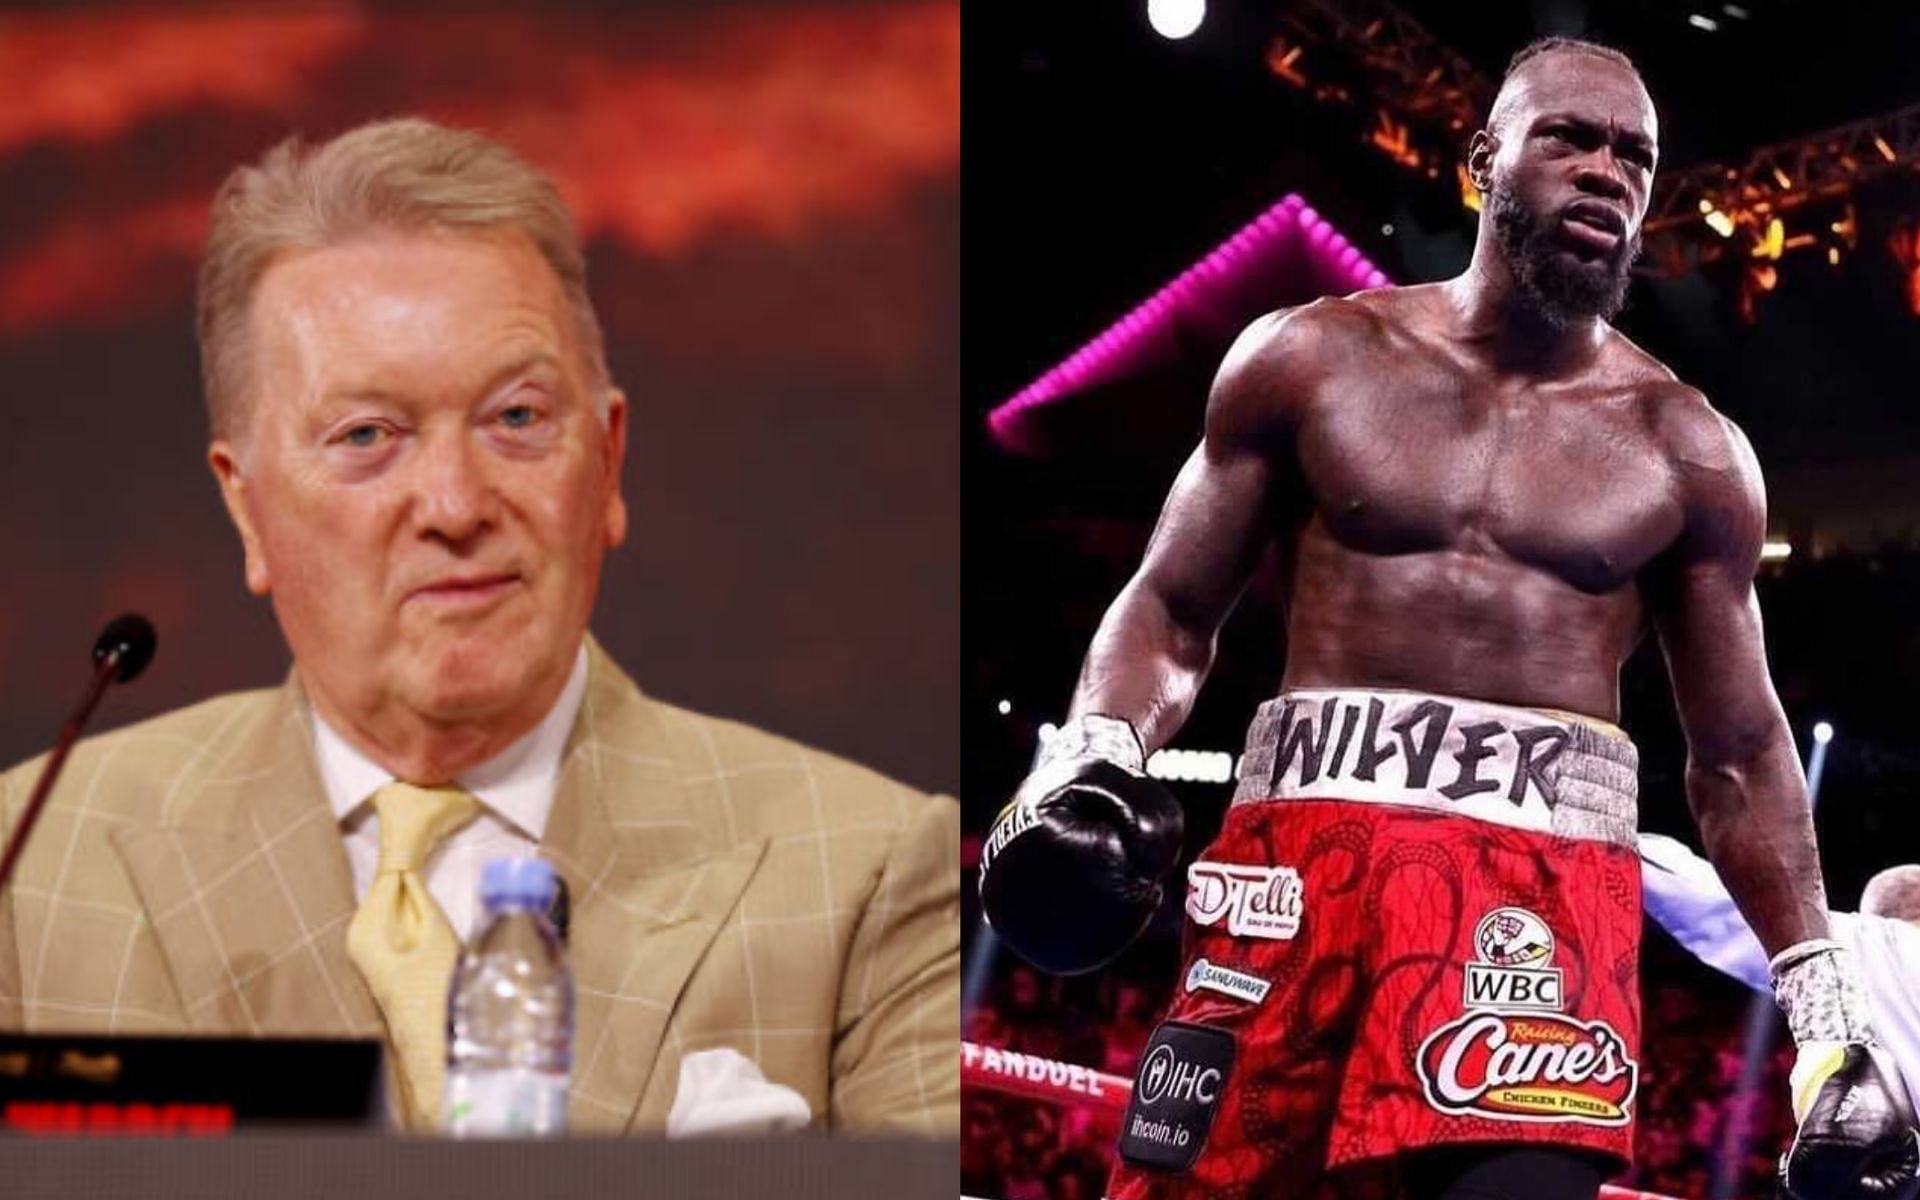 Frank Warren (left) claiming an injury for Deontay Wilder (right) [Photo Courtesy of Getty Images and @bronzebomber on Instagram]